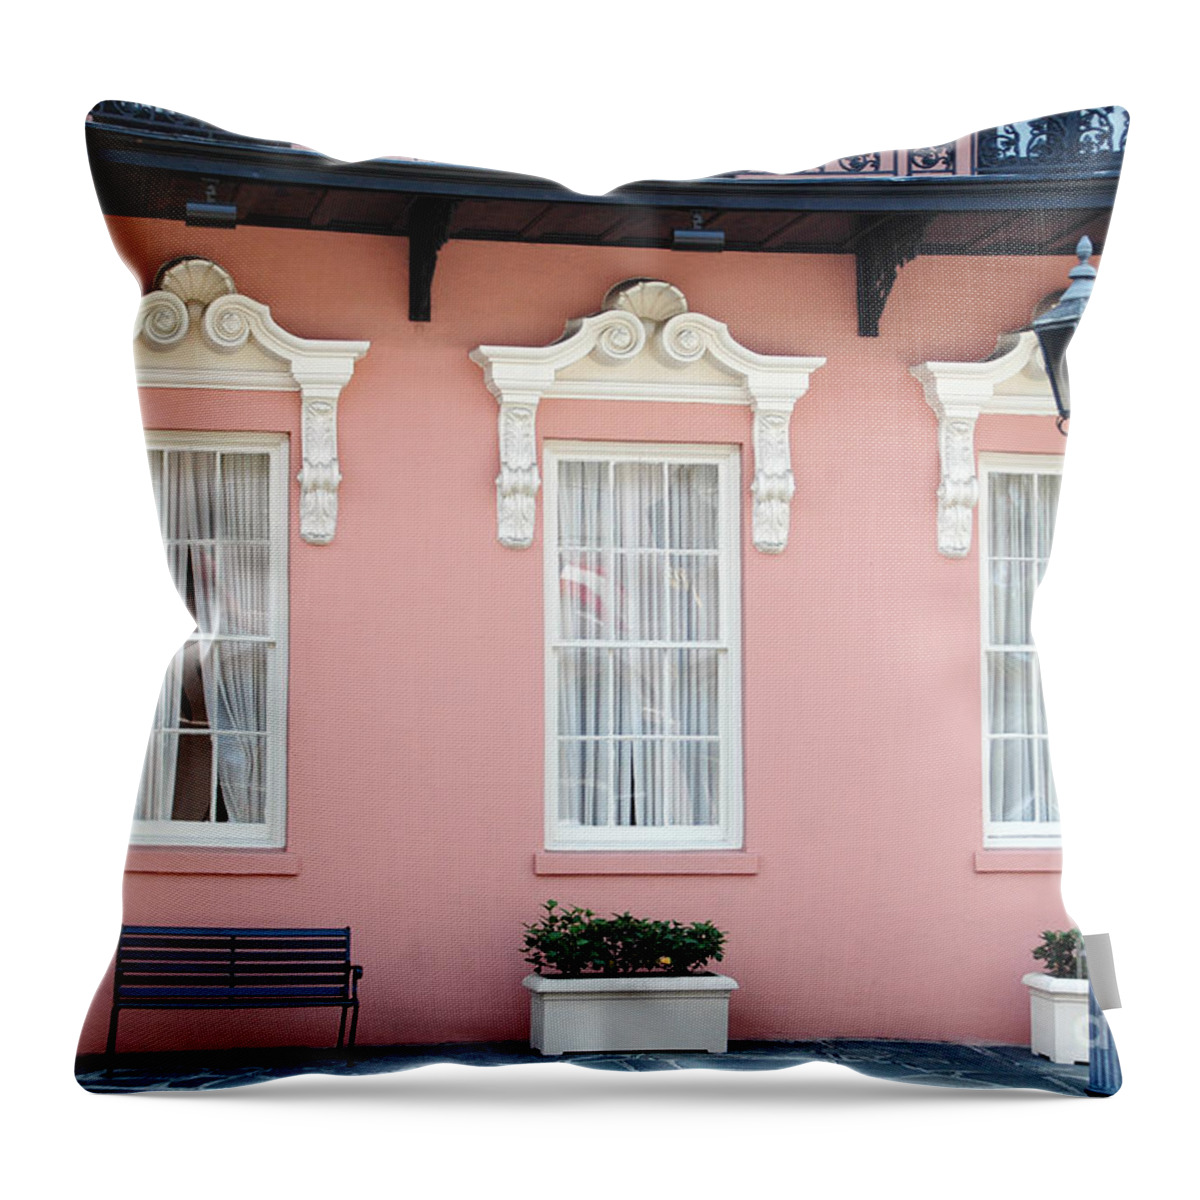 Charleston Houses Throw Pillow featuring the photograph Charleston Historical District - The Mills House - Charleston Architecture by Kathy Fornal